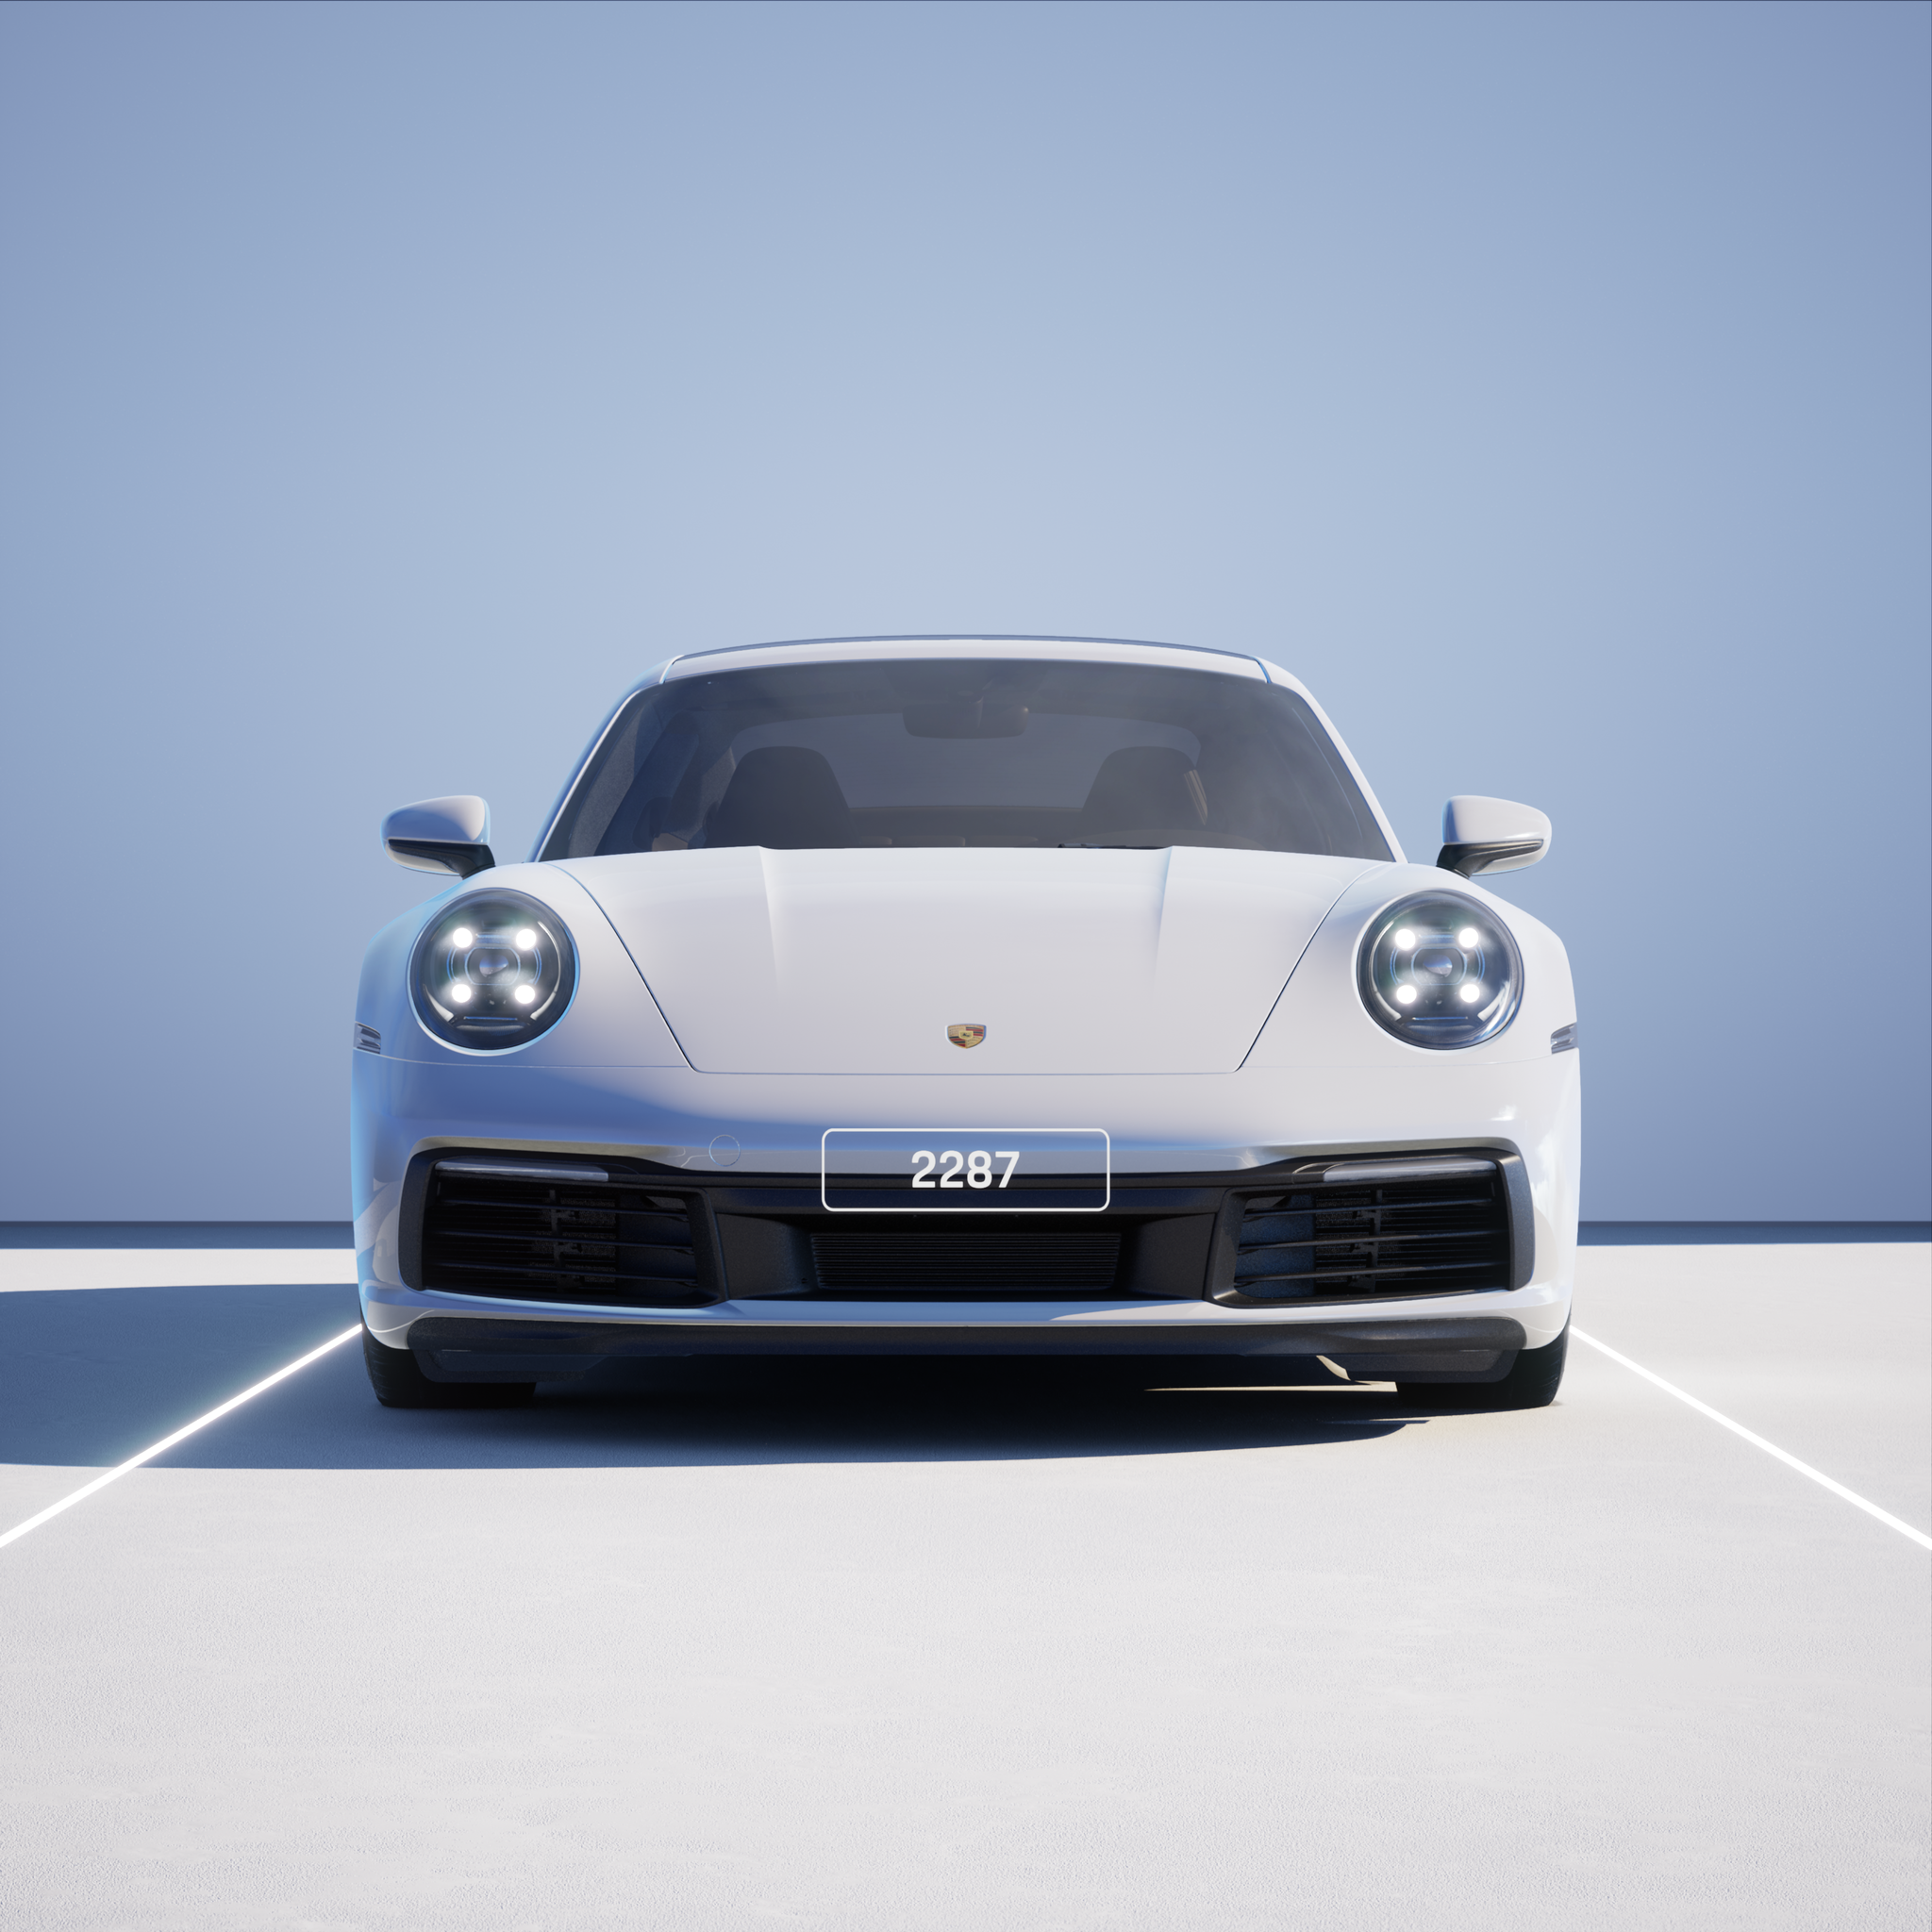 The PORSCHΞ 911 2287 image in phase